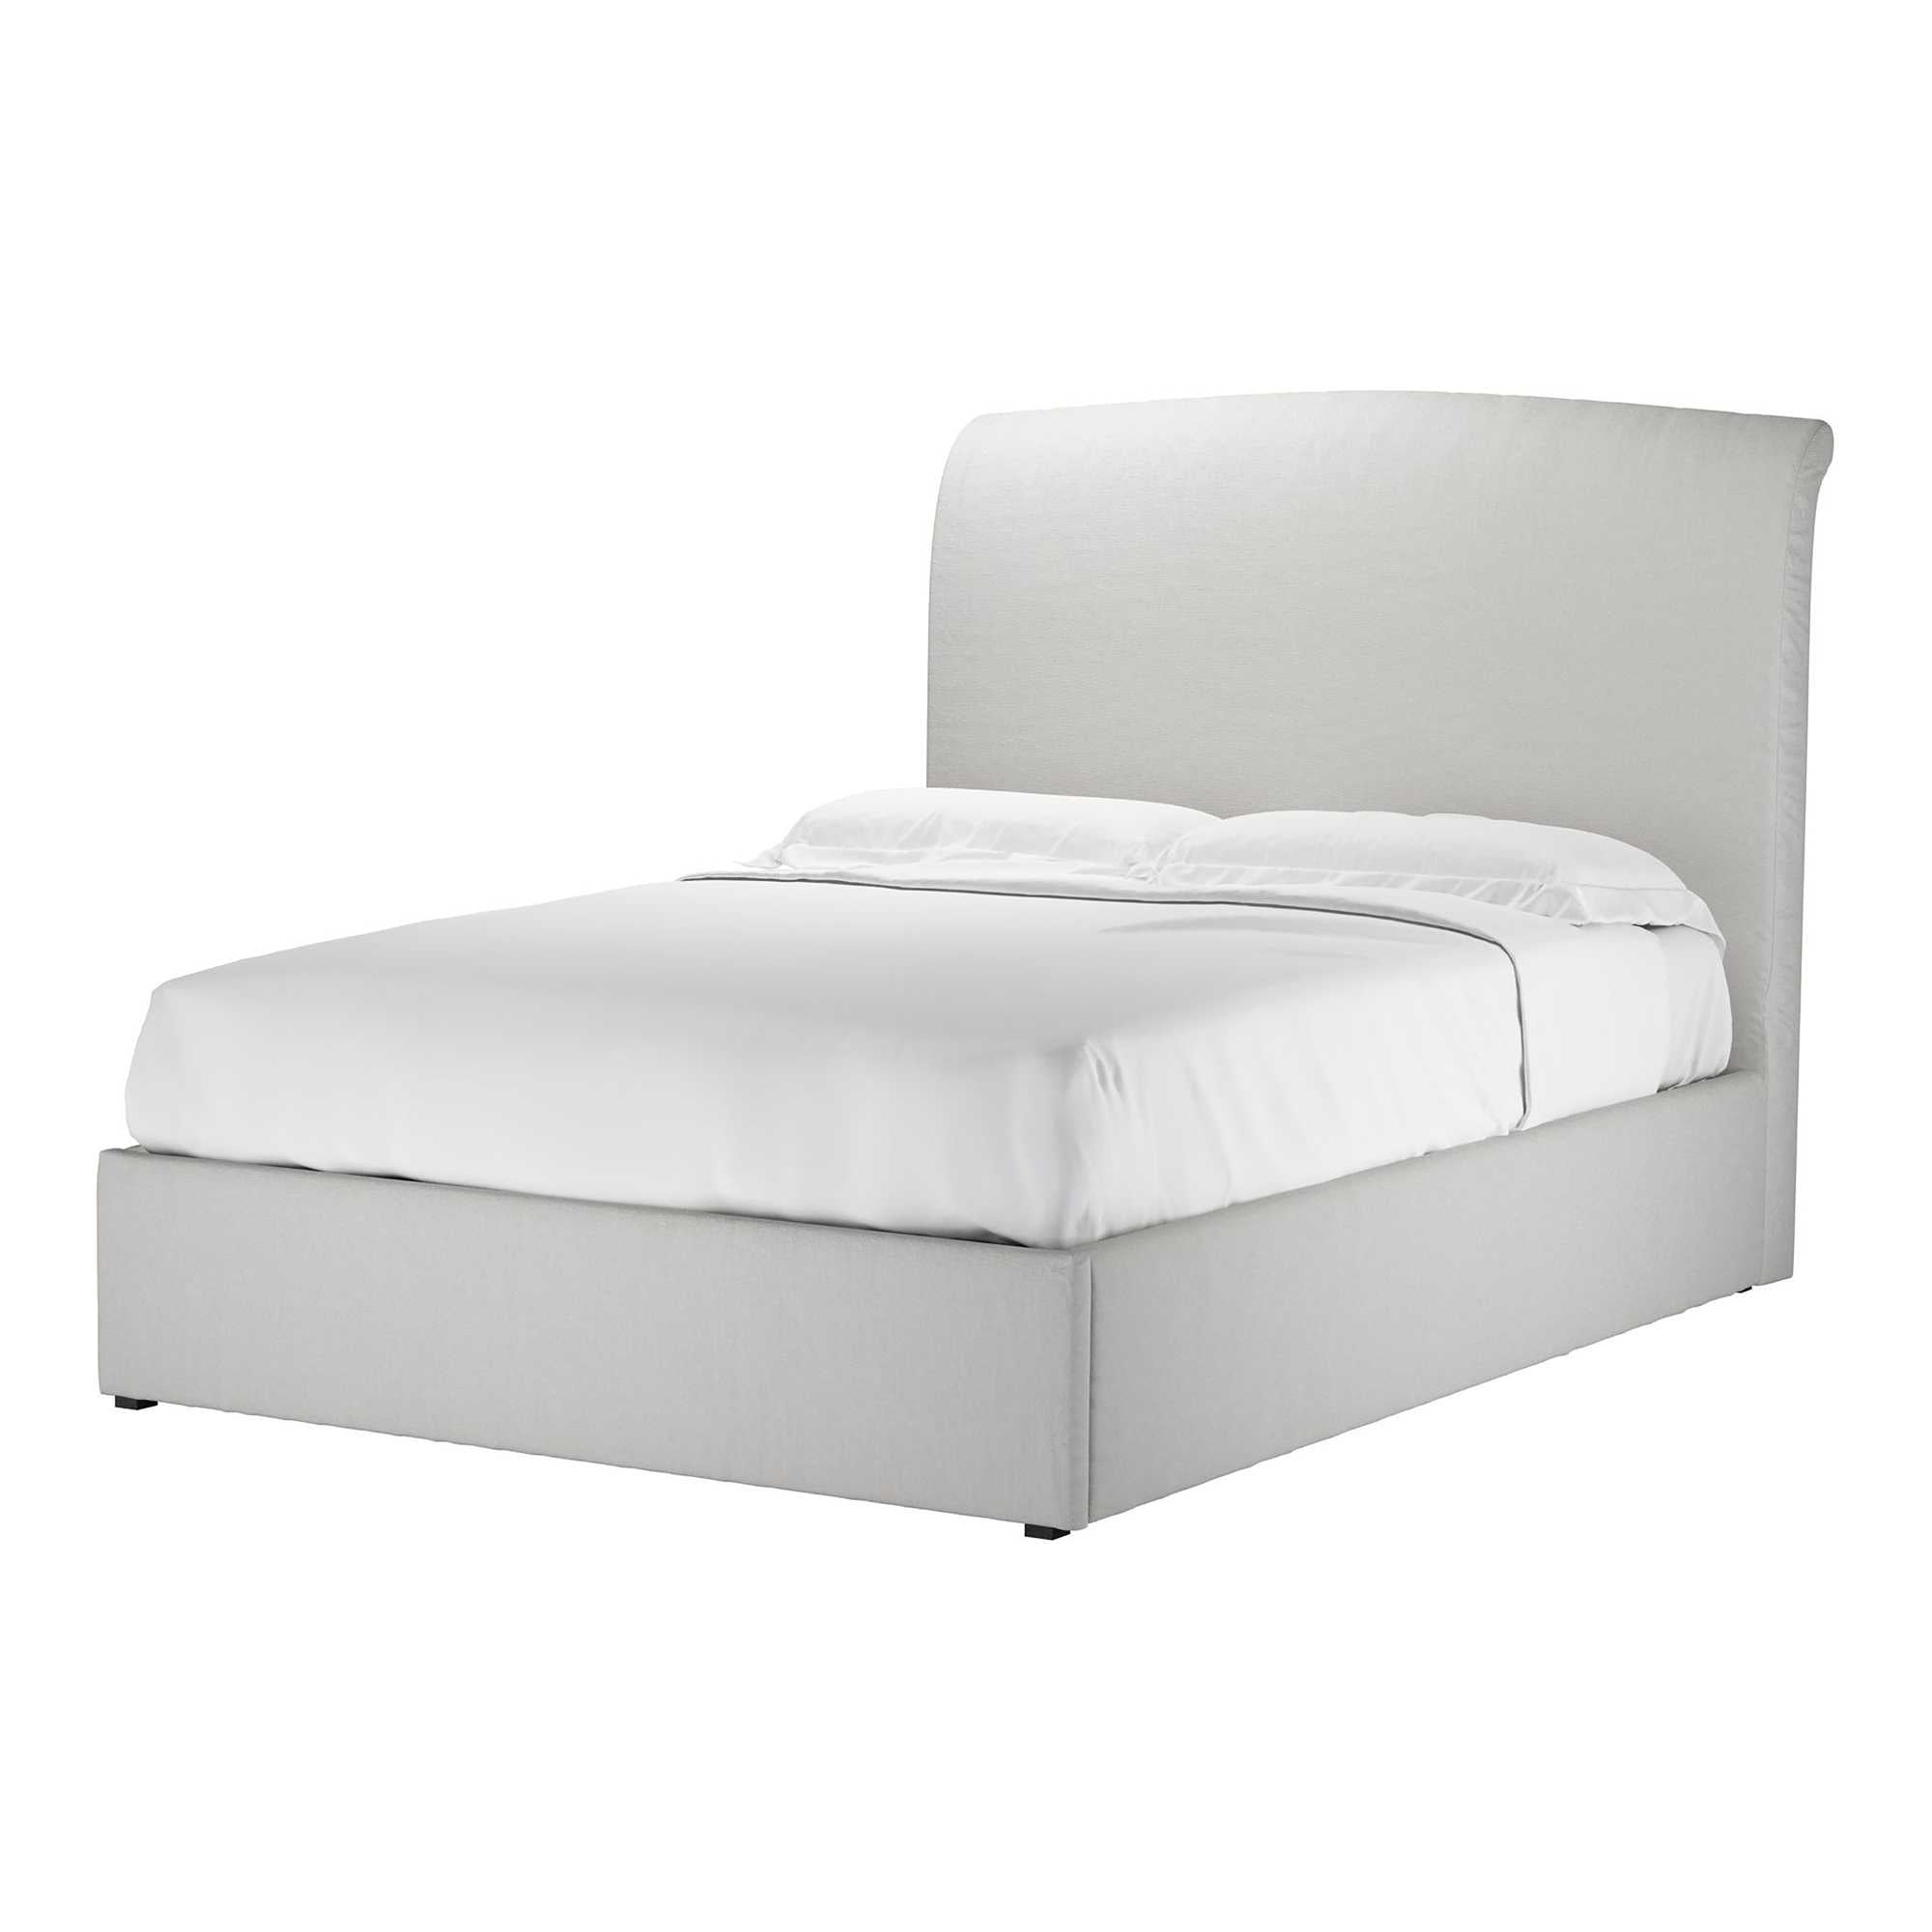 Thea Alabaster Brushed Linen Cotton Ottoman Bed - Double Size